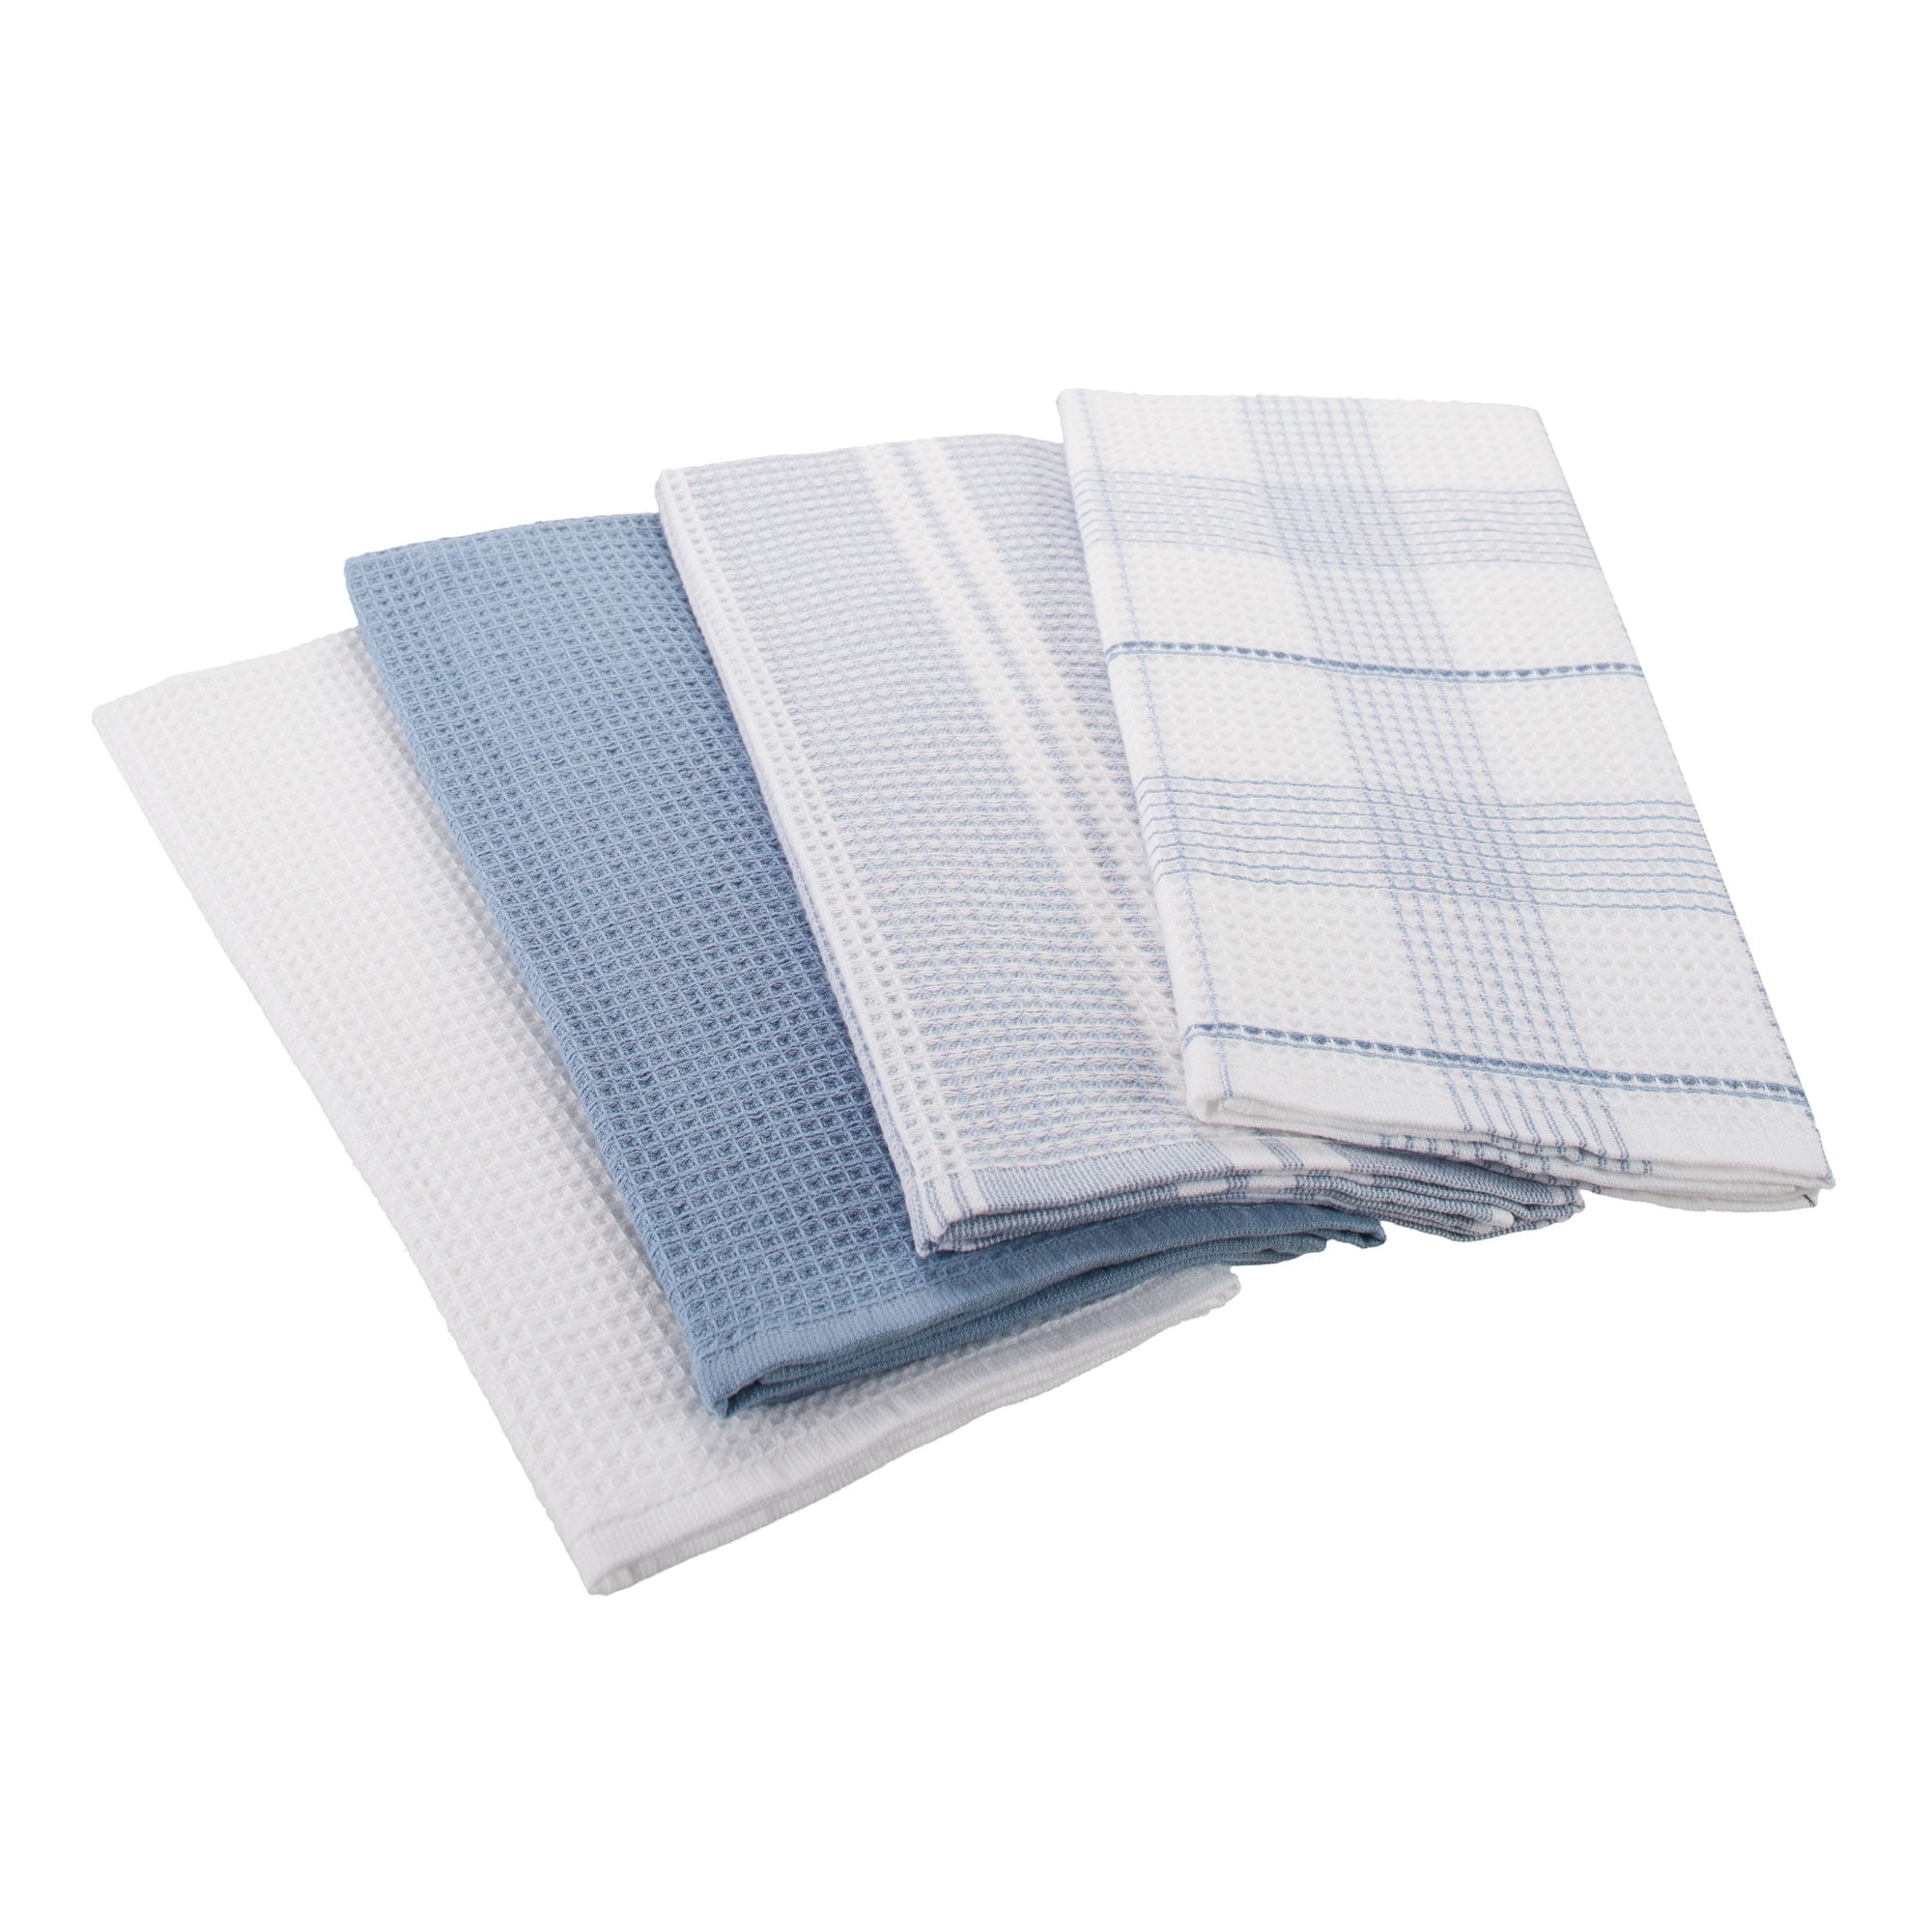 Fine Quality Waffle Weave Kitchen Towels, Decorative Dish Cloth Set of 4,  100% Cotton Tea Towels, Super Absorbent, 18 by 27 Inch - Blue Bands - The  Linen Bazaar